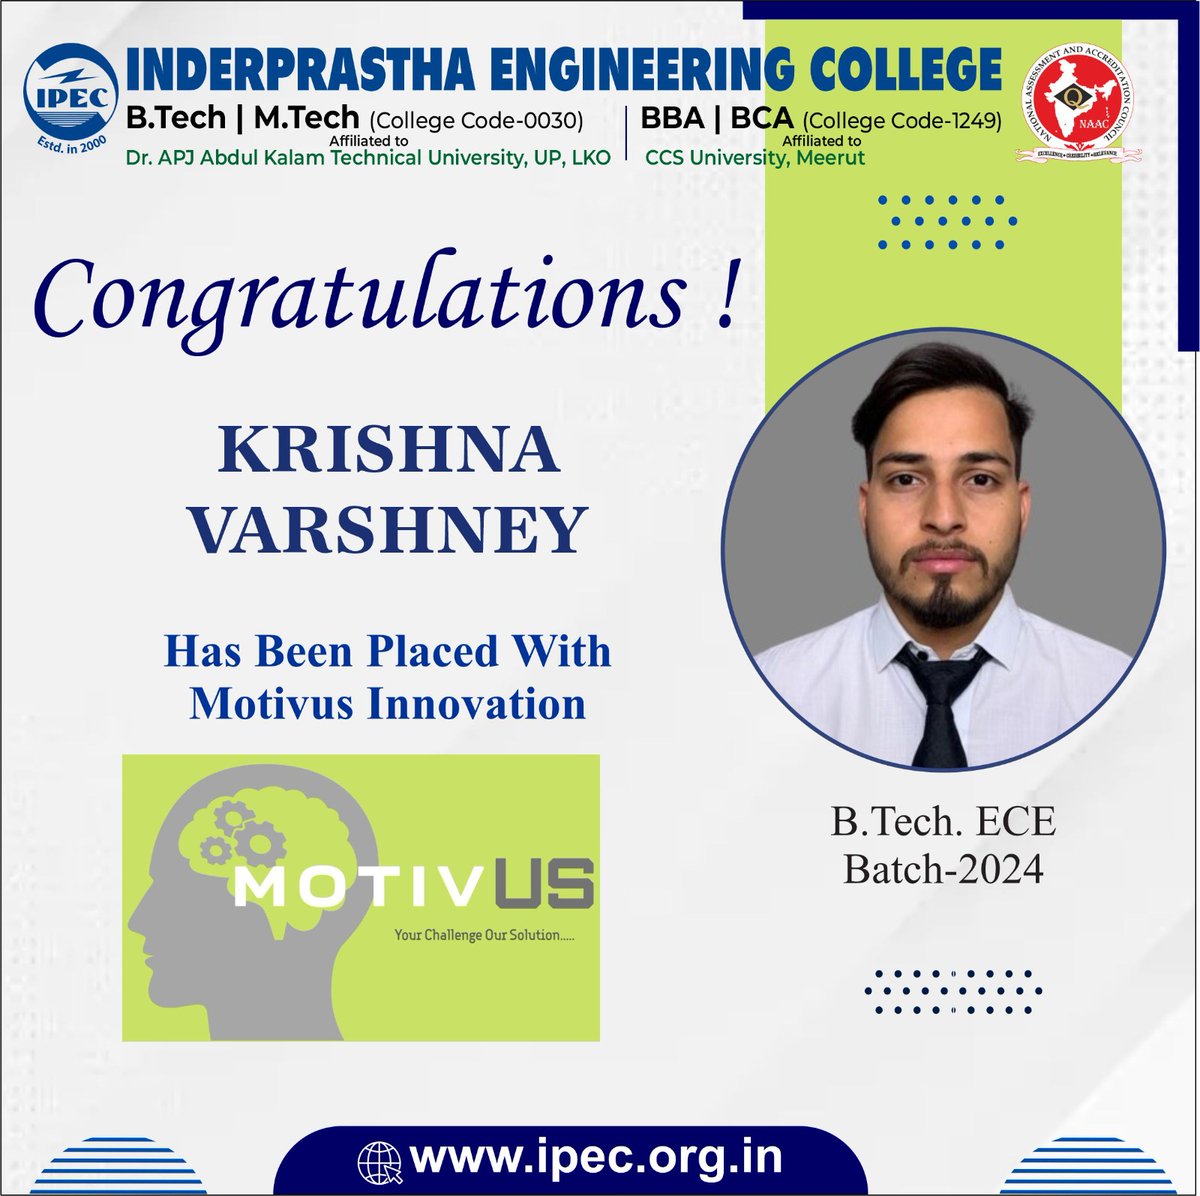 Congratulations!!!
Department of Electronics and Communication Engineering, Inderprastha Engineering College, Ghaziabad, is proud to announce the placement of Krishna Varshney in Motivus Innovation.
IPEC wishes all the best for his future endeavours.
.
#ipec #AICTE #bestcollege